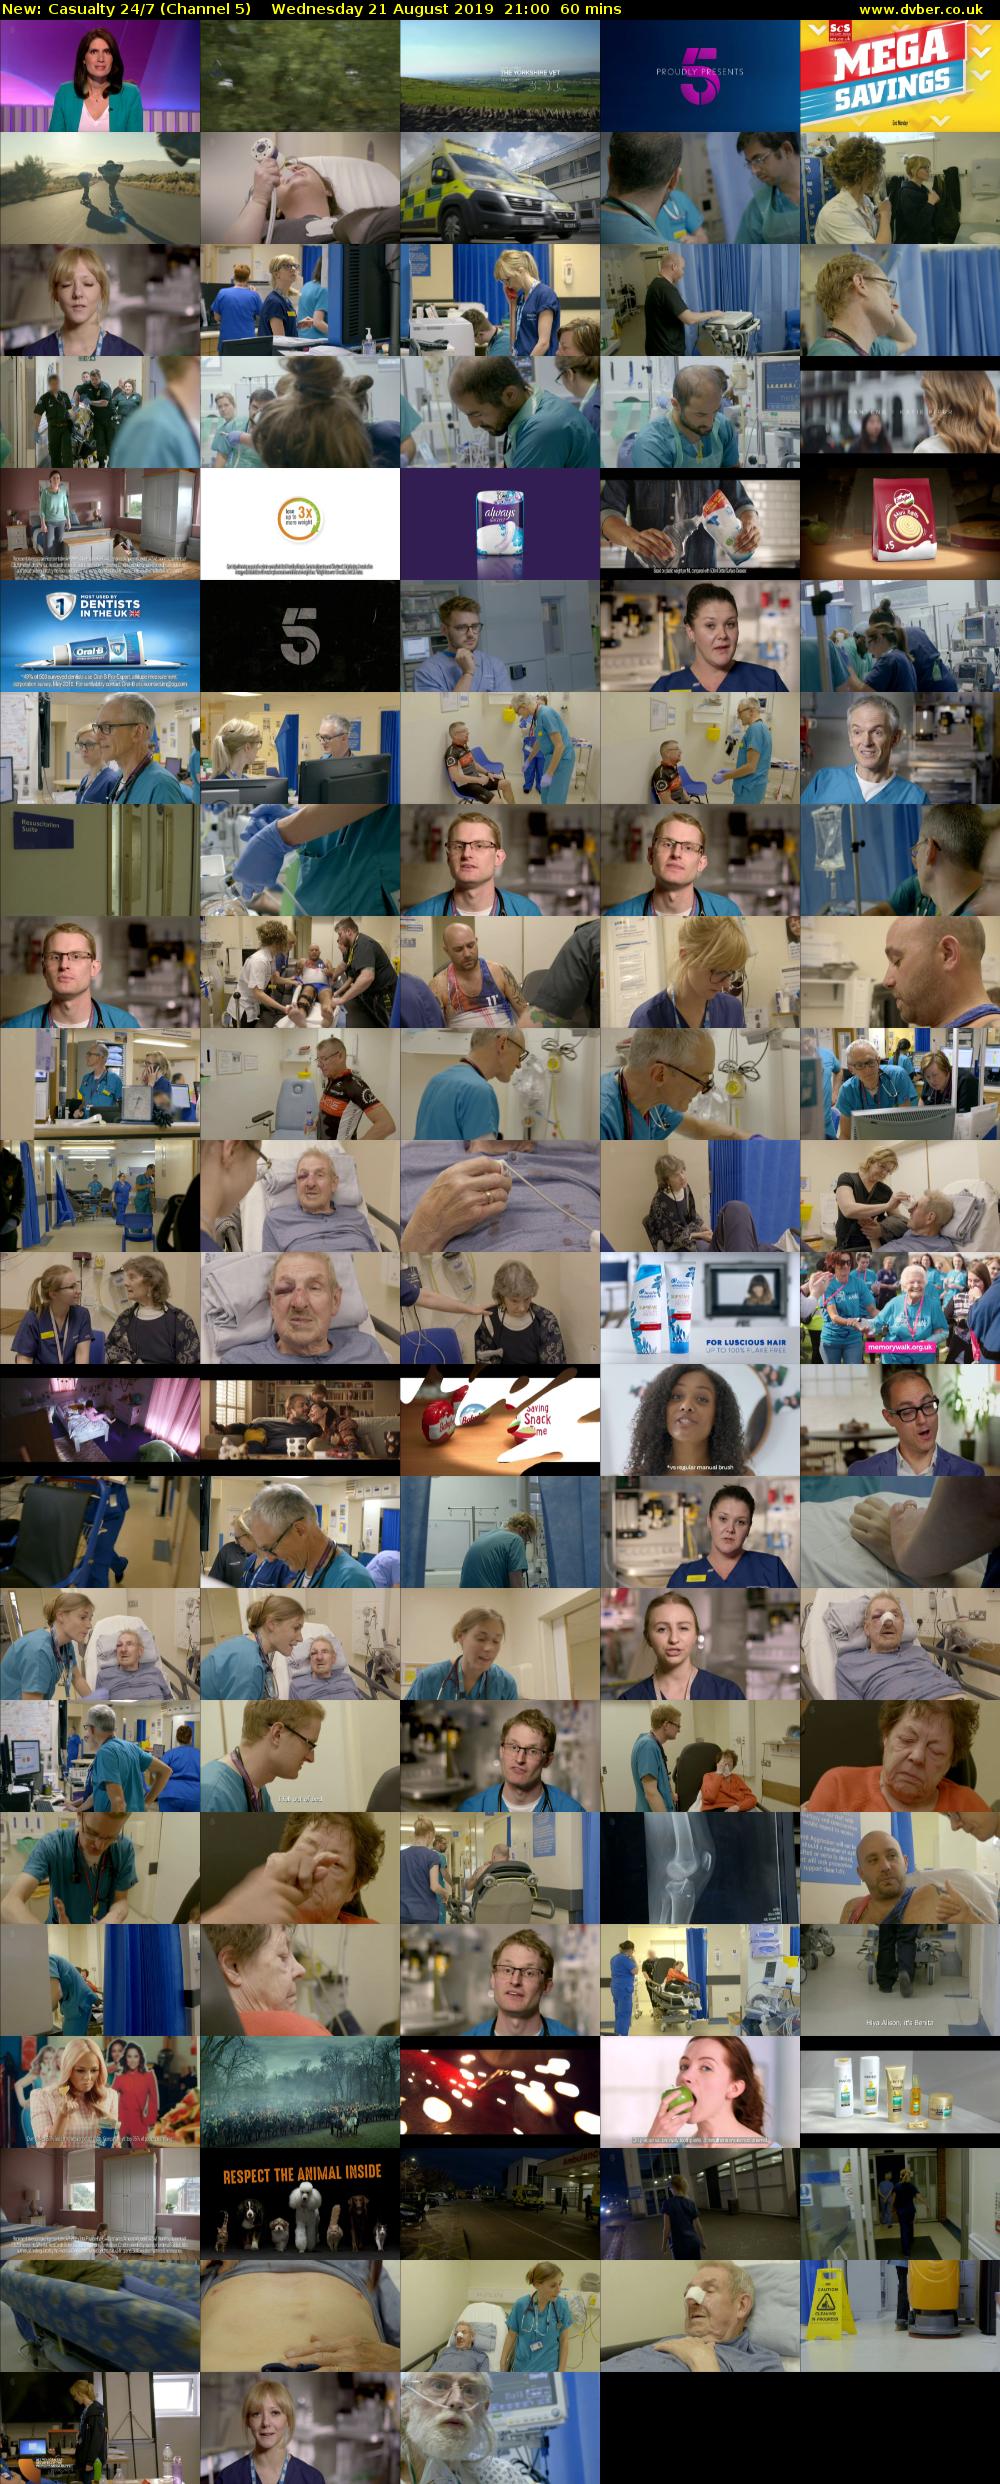 Casualty 24/7 (Channel 5) Wednesday 21 August 2019 21:00 - 22:00